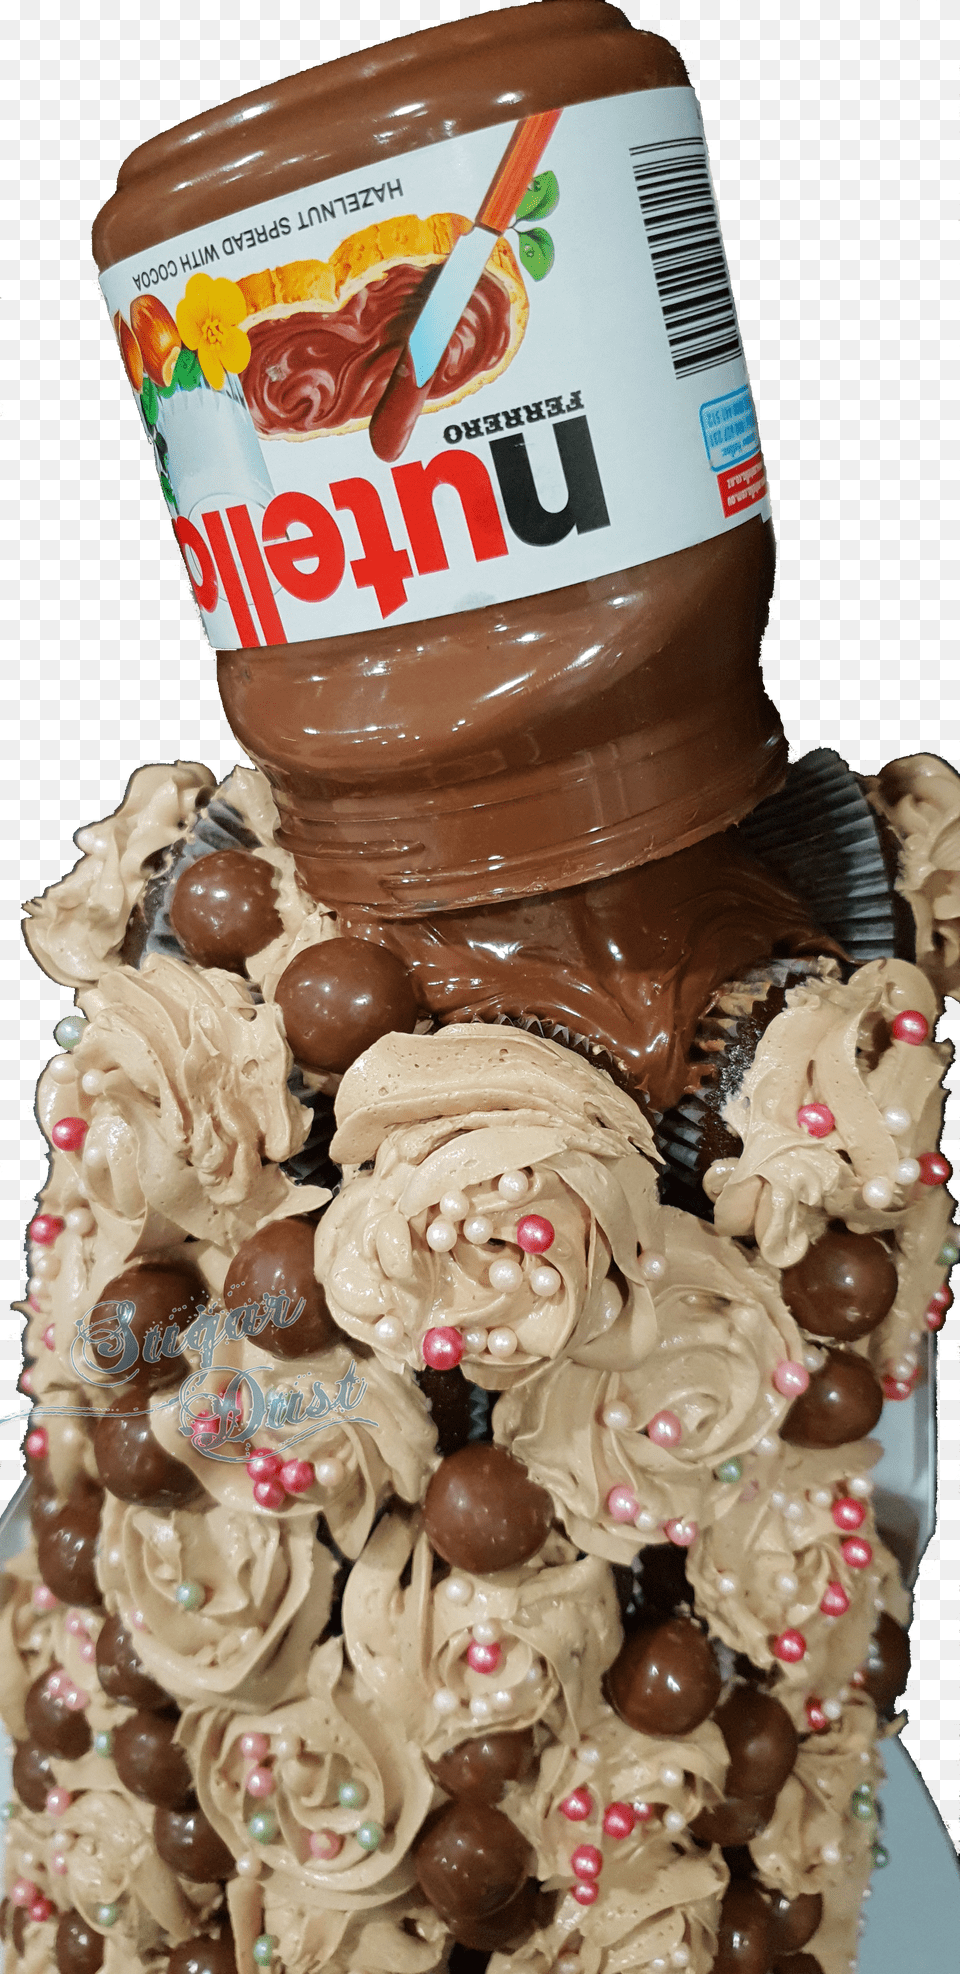 Nutella Png Image